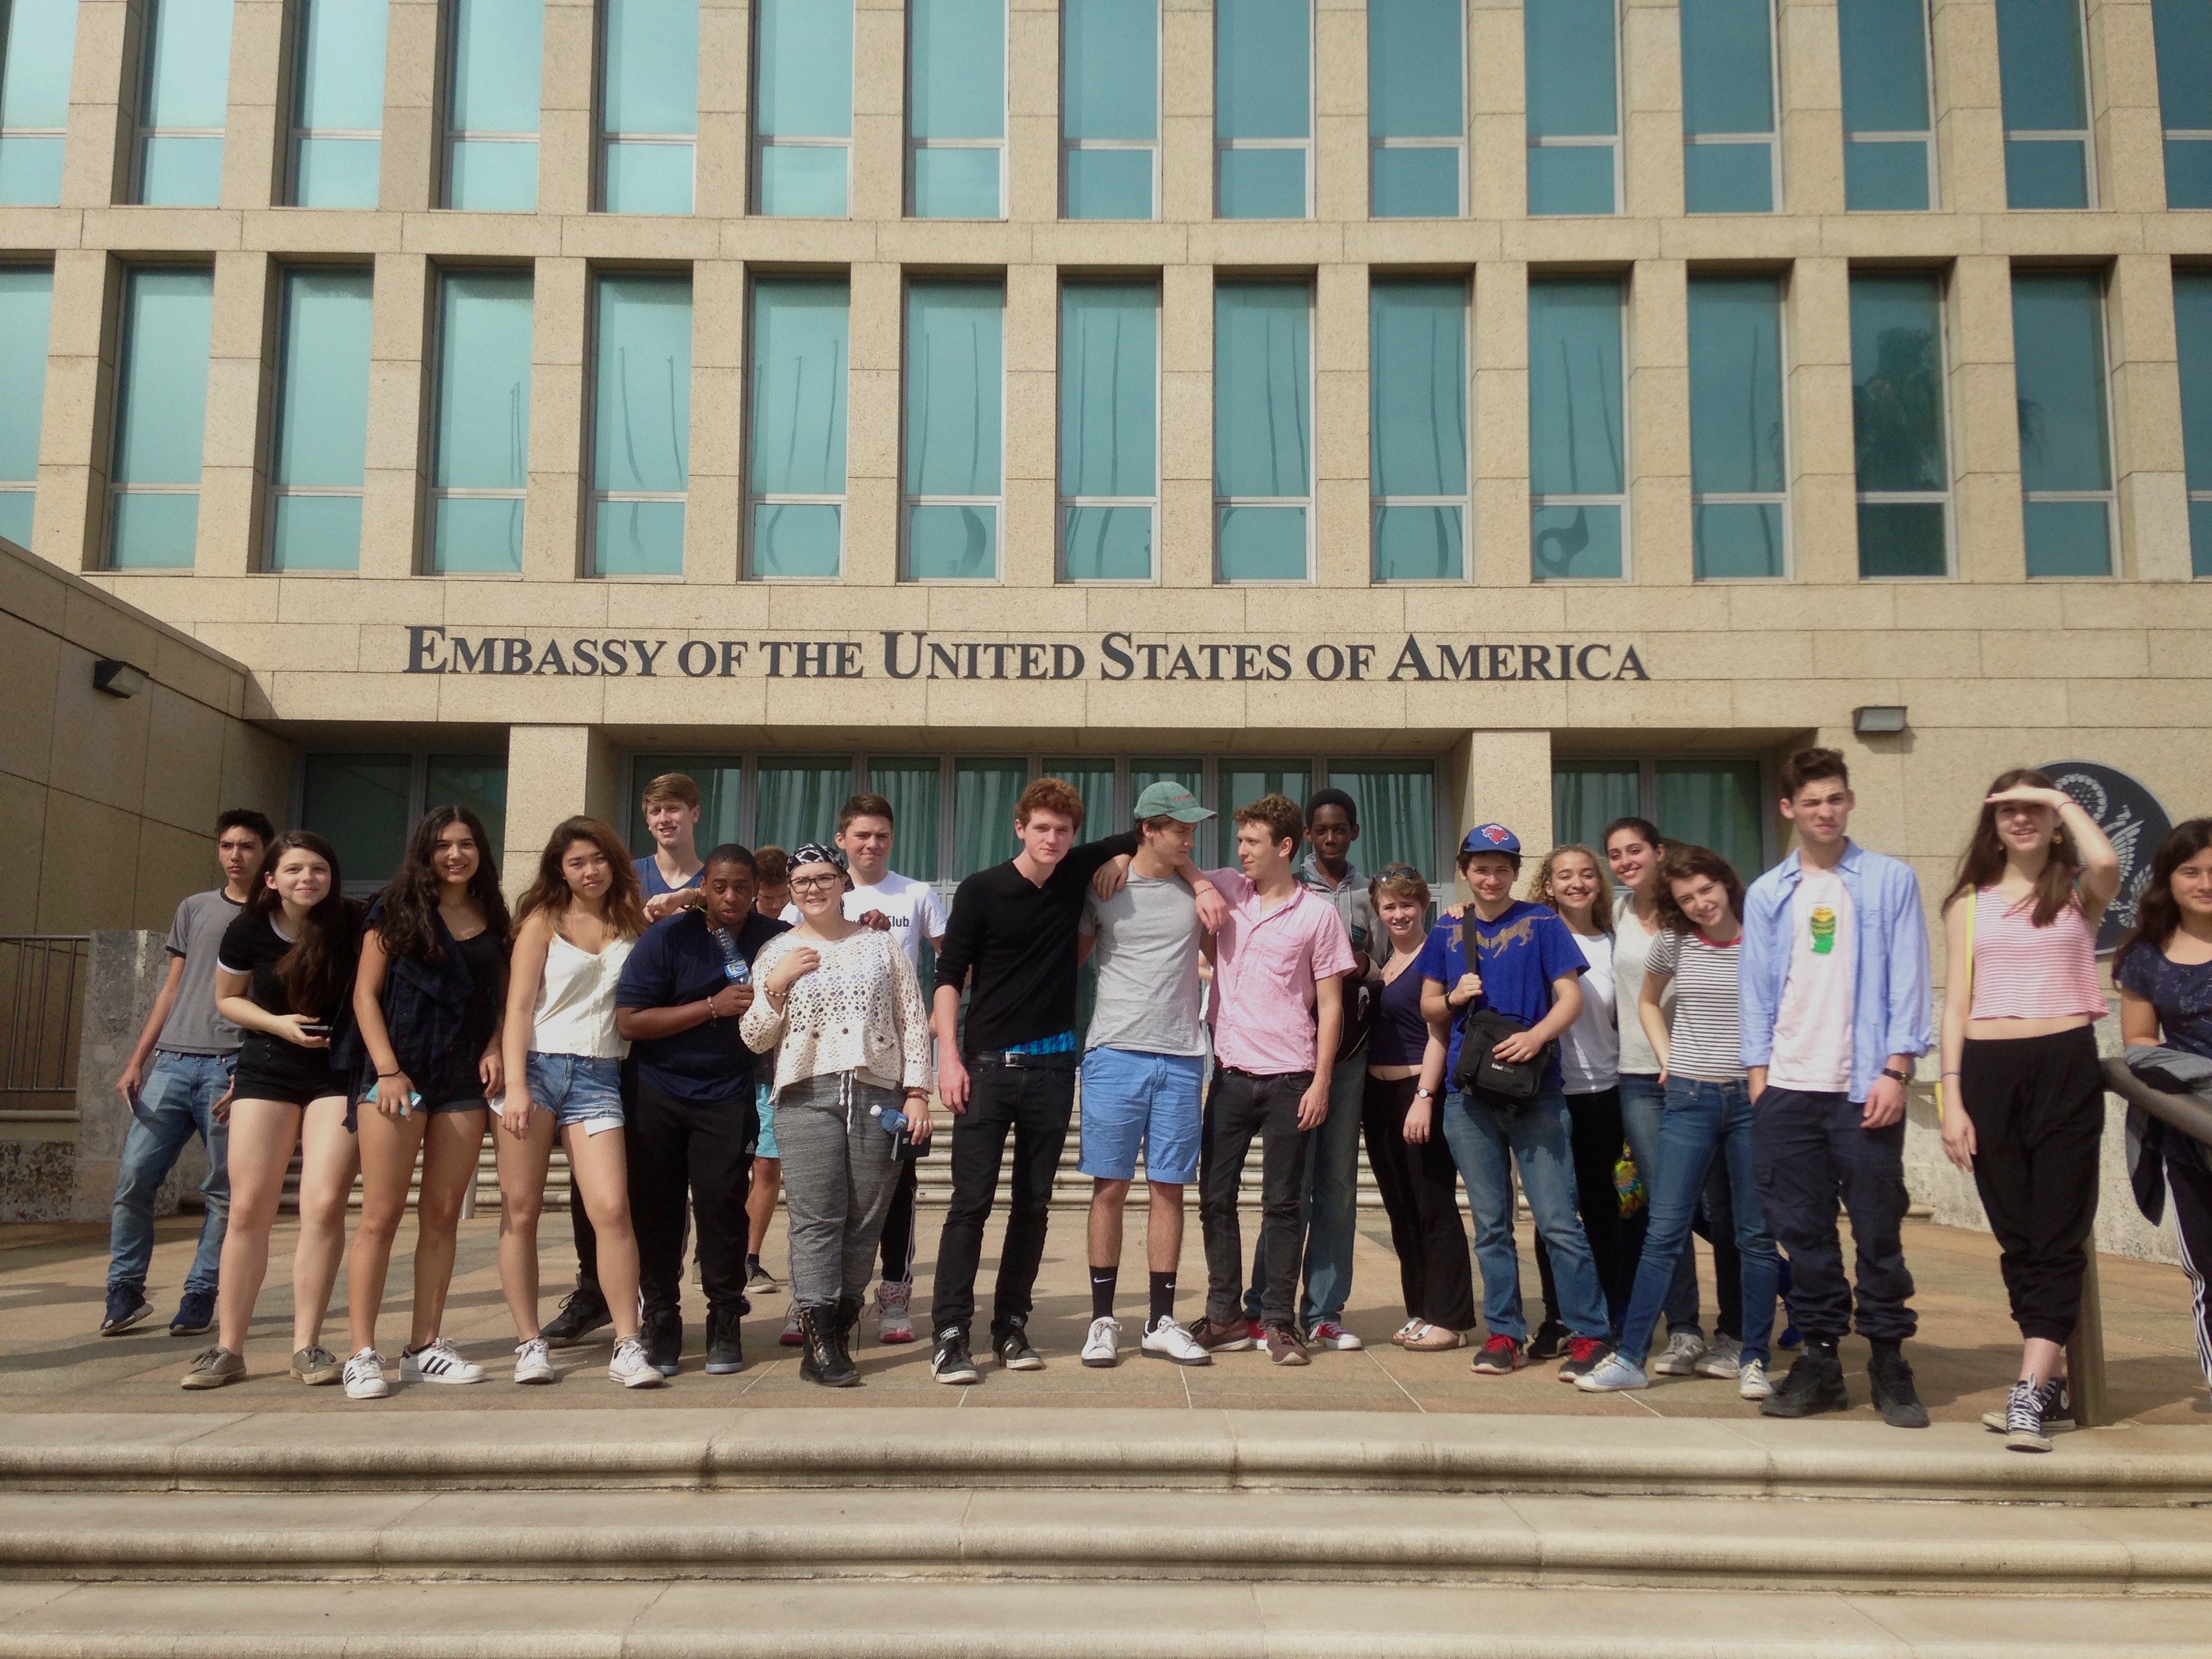 Visit to the American embassy in Havana where we were briefed on the economic history of Cuba and the new diplomatic relationships between the USA and the Island.